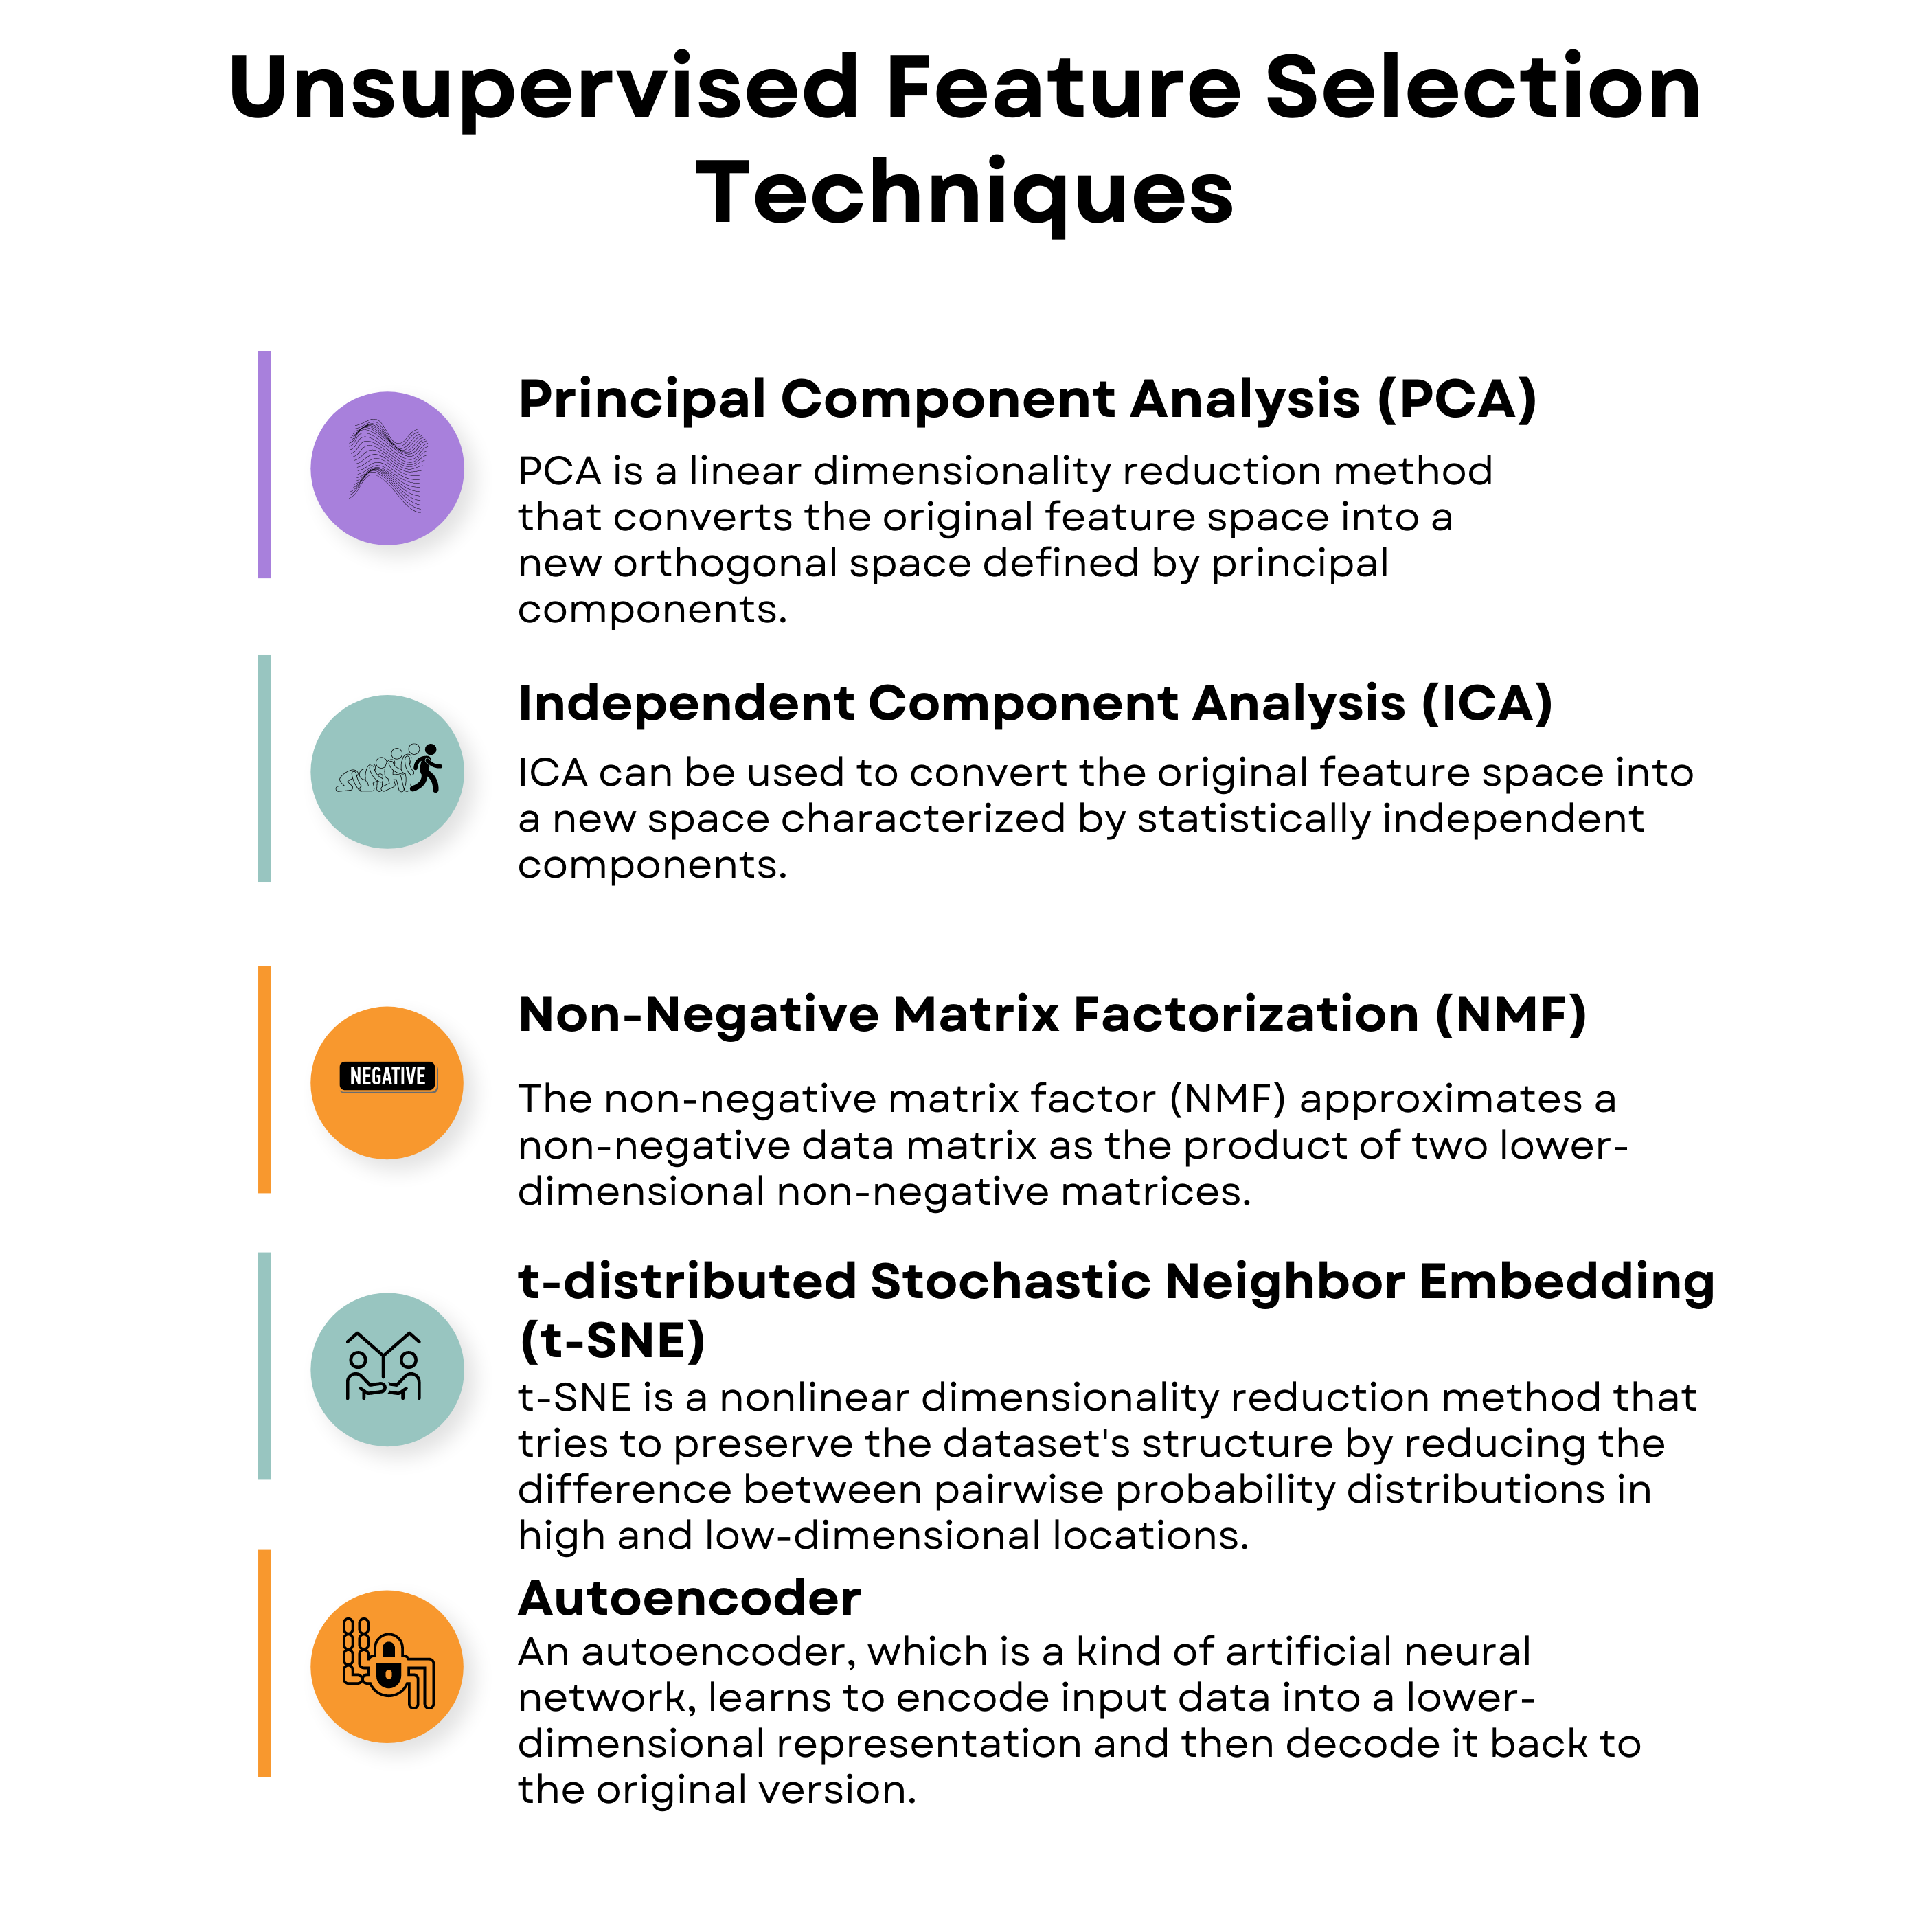 Unsupervised Feature Selection Techniques in Machine Learning